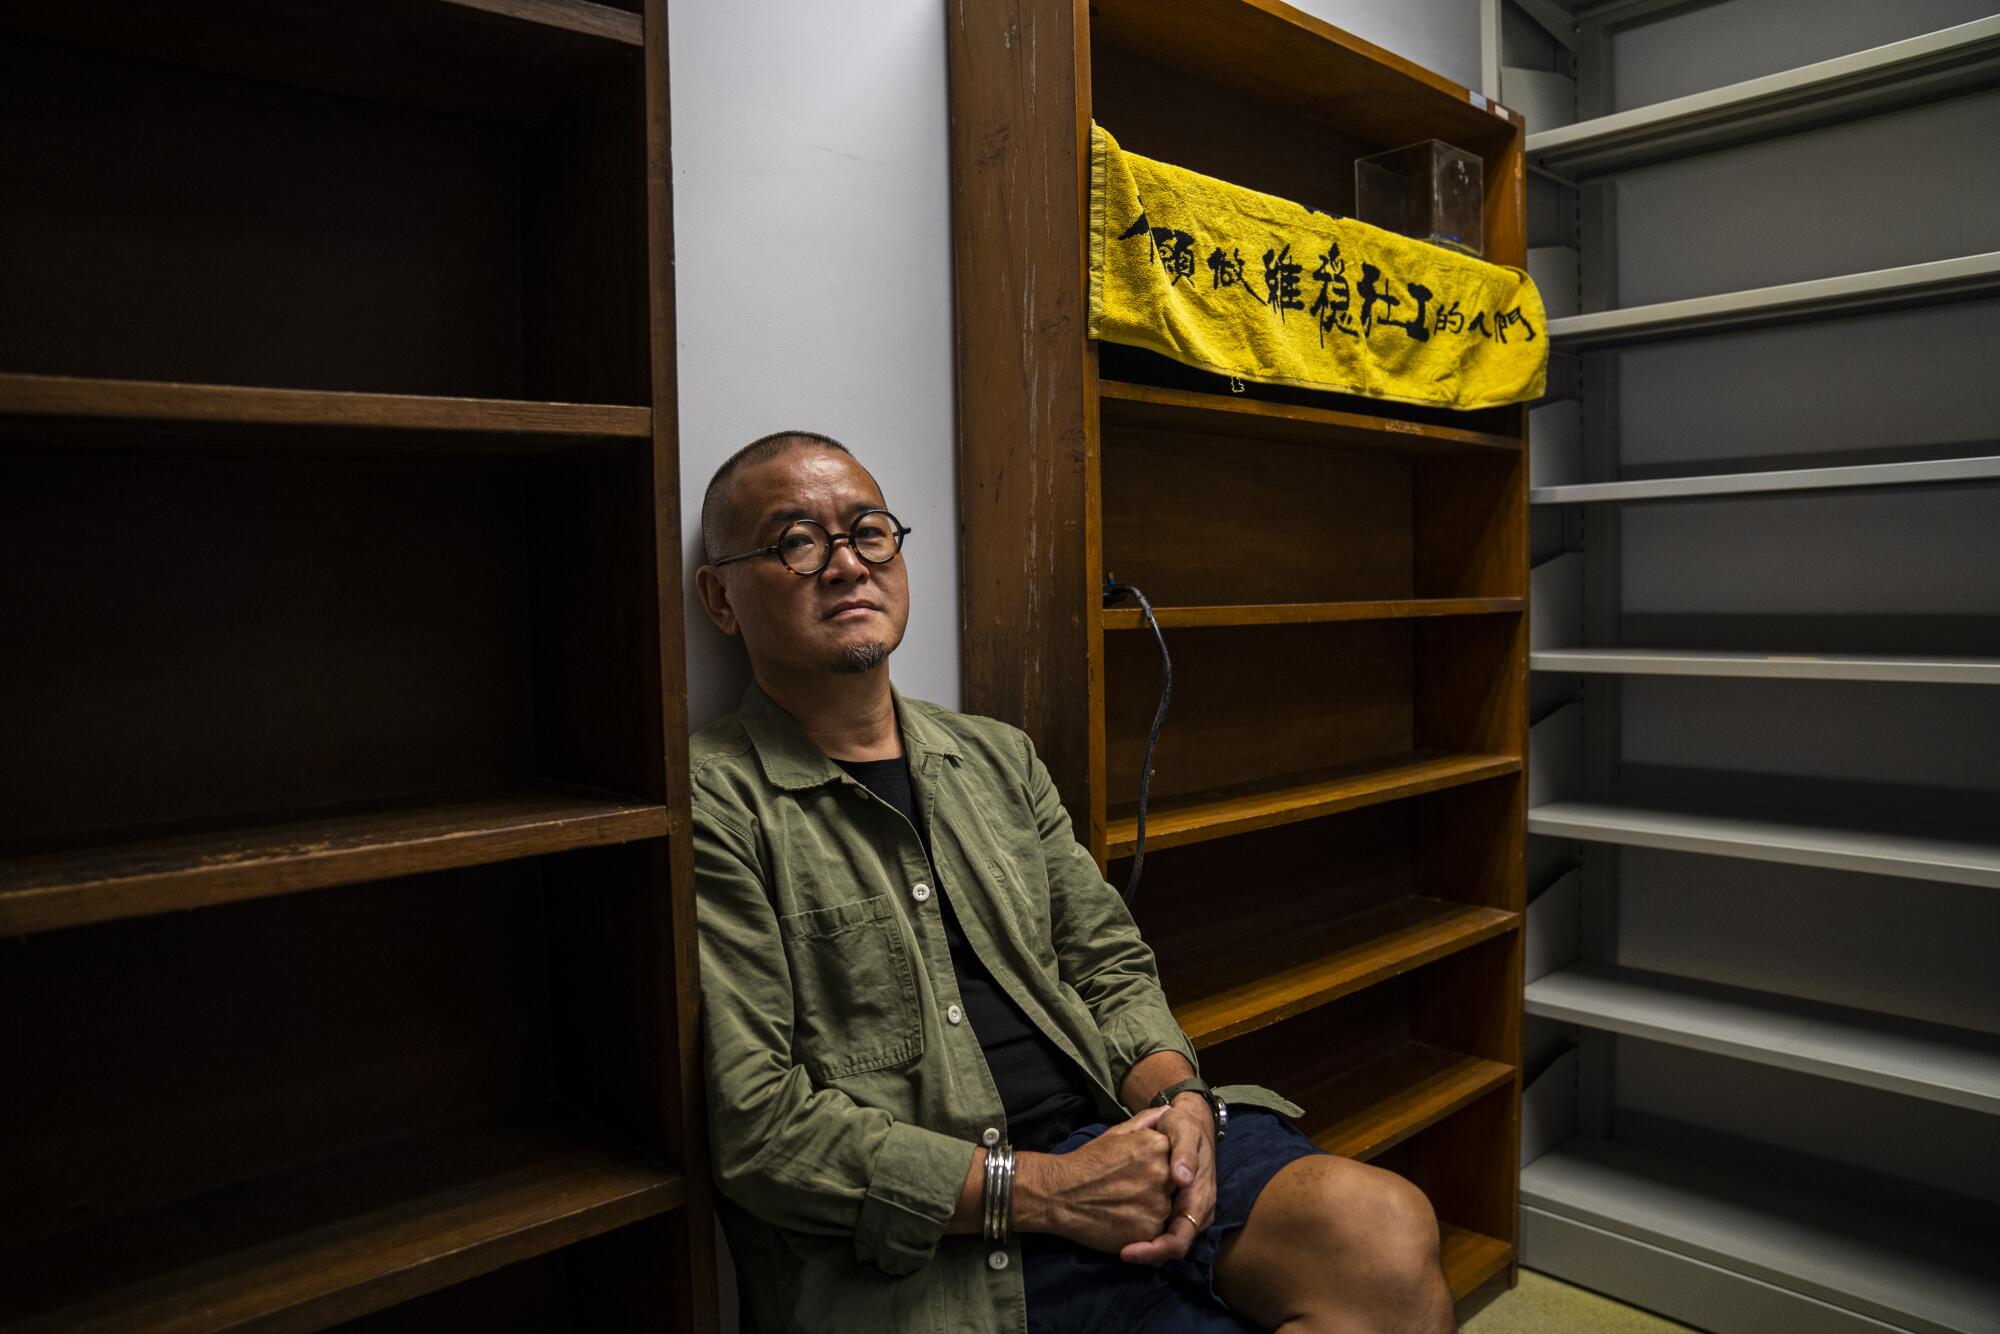 A man in glasses and a green overshirt sits in between empty bookshelves.